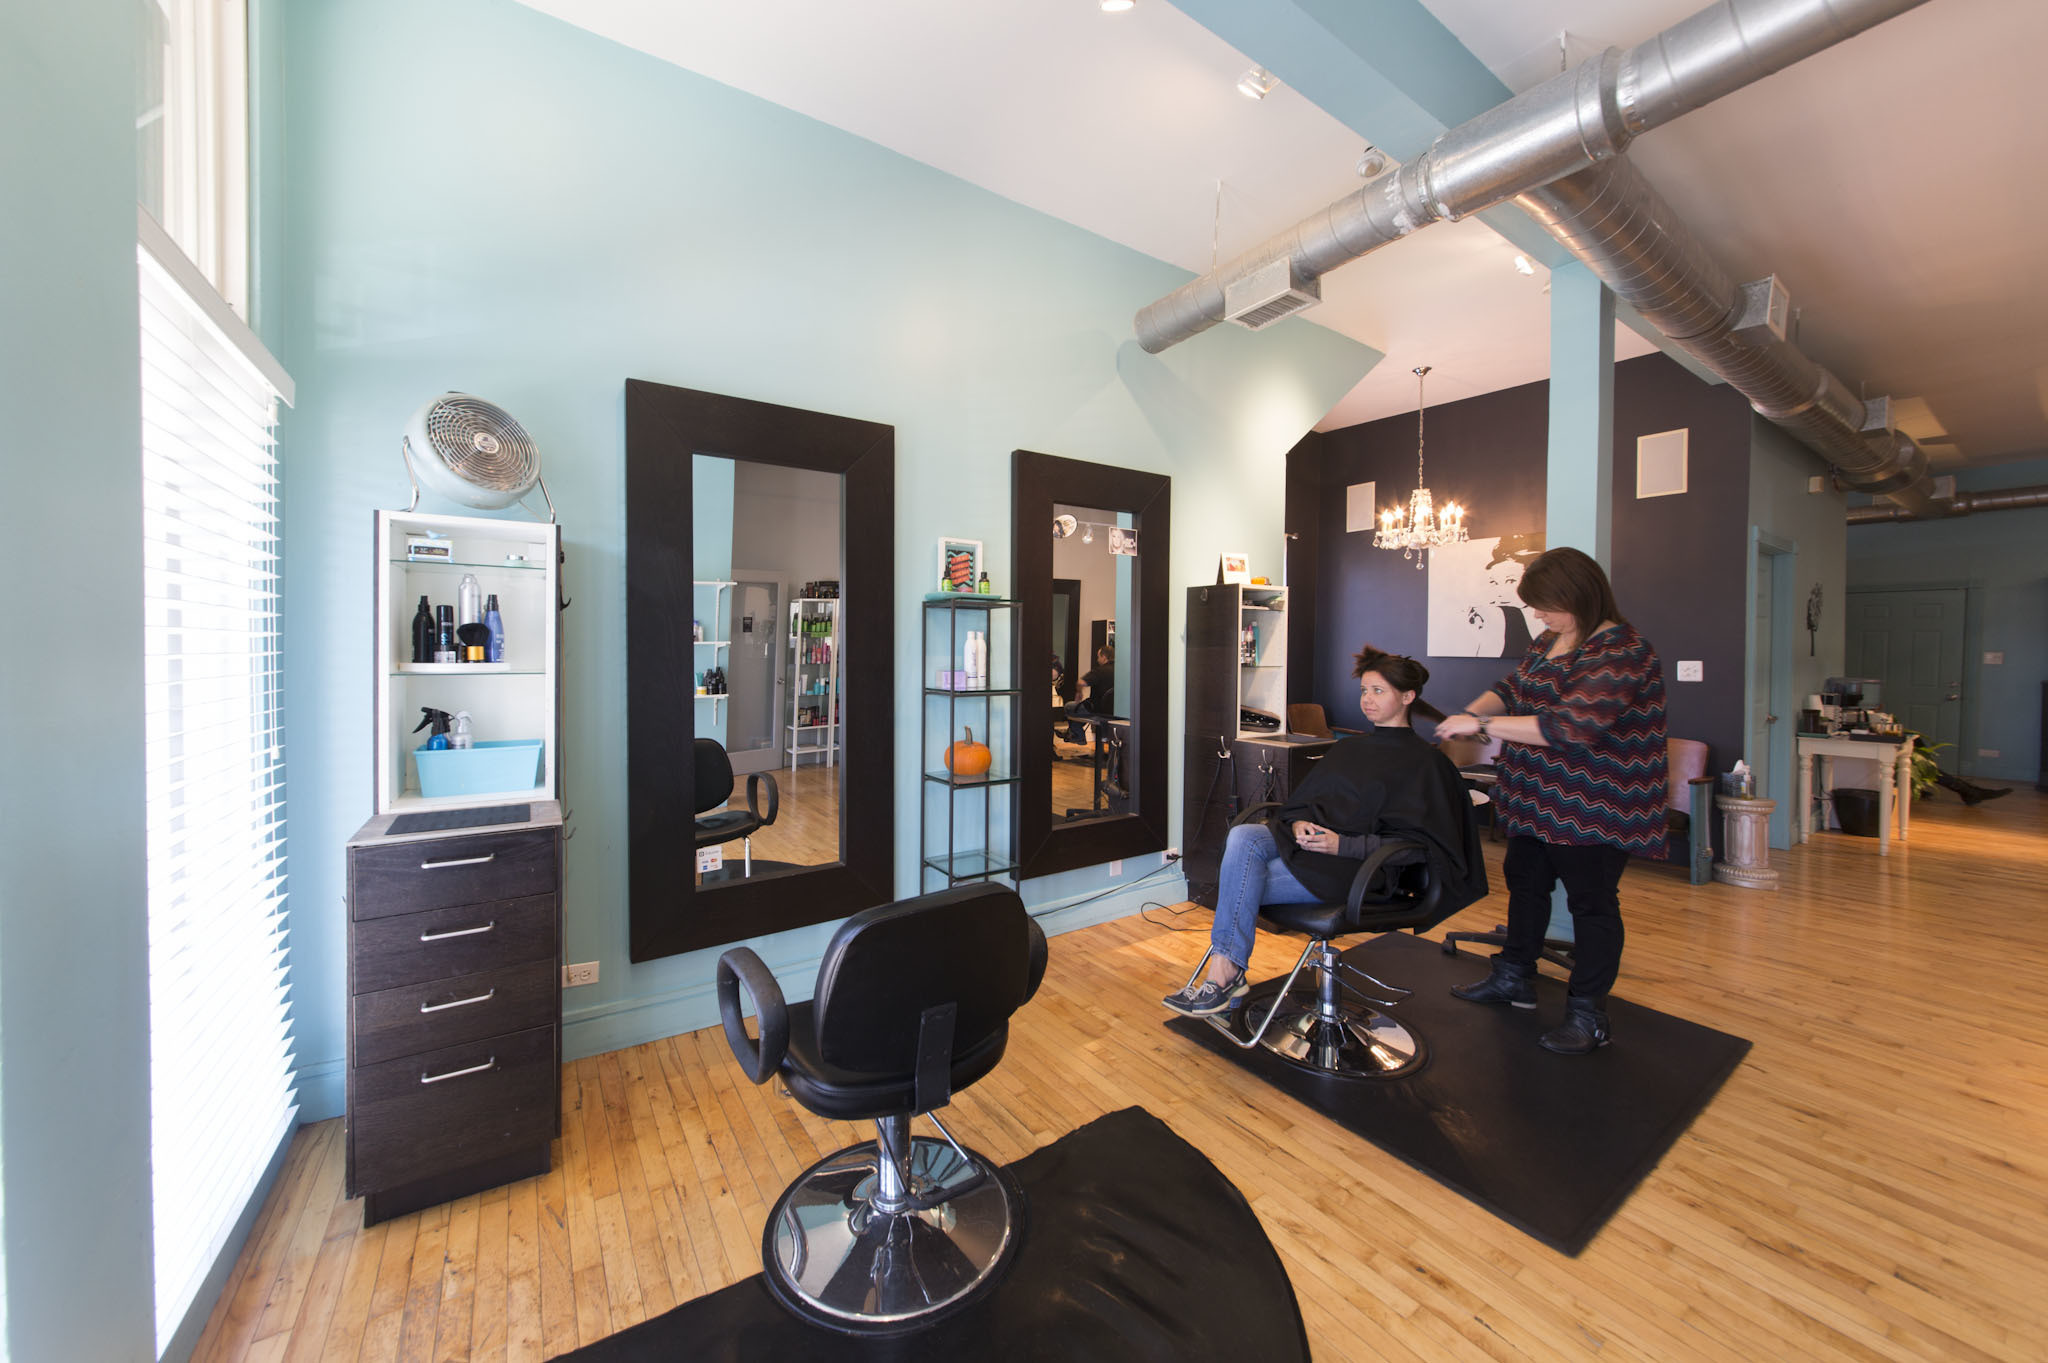 Kids Haircuts Chicago
 The best spas in Chicago for massages manicures and more